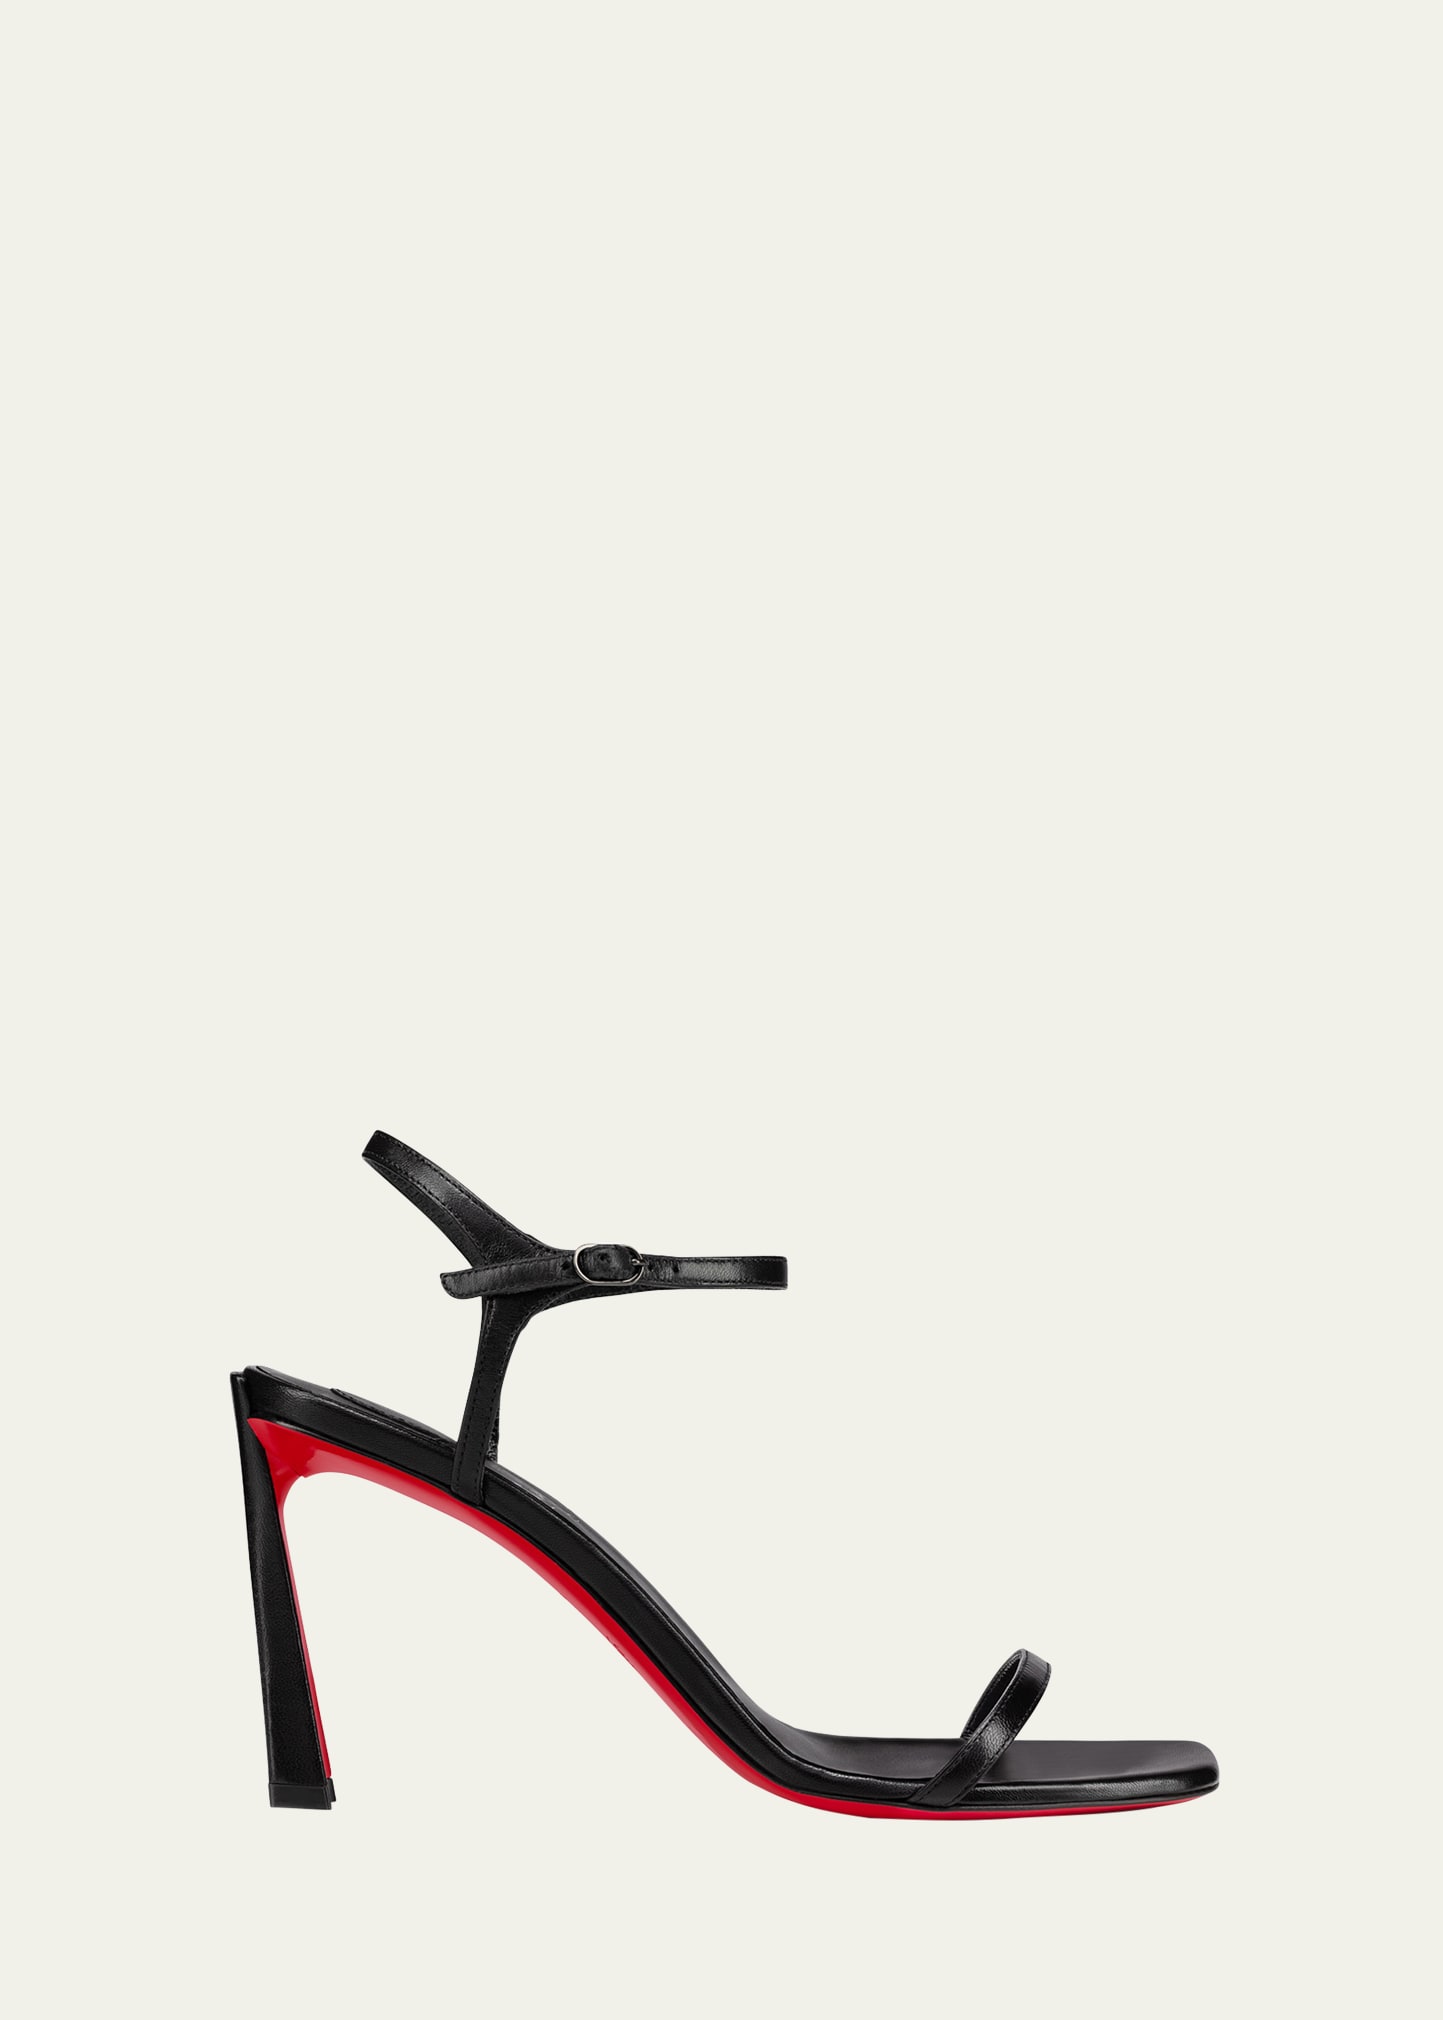 Christian Louboutin Condora Ankle-Strap Red Sole Sandals